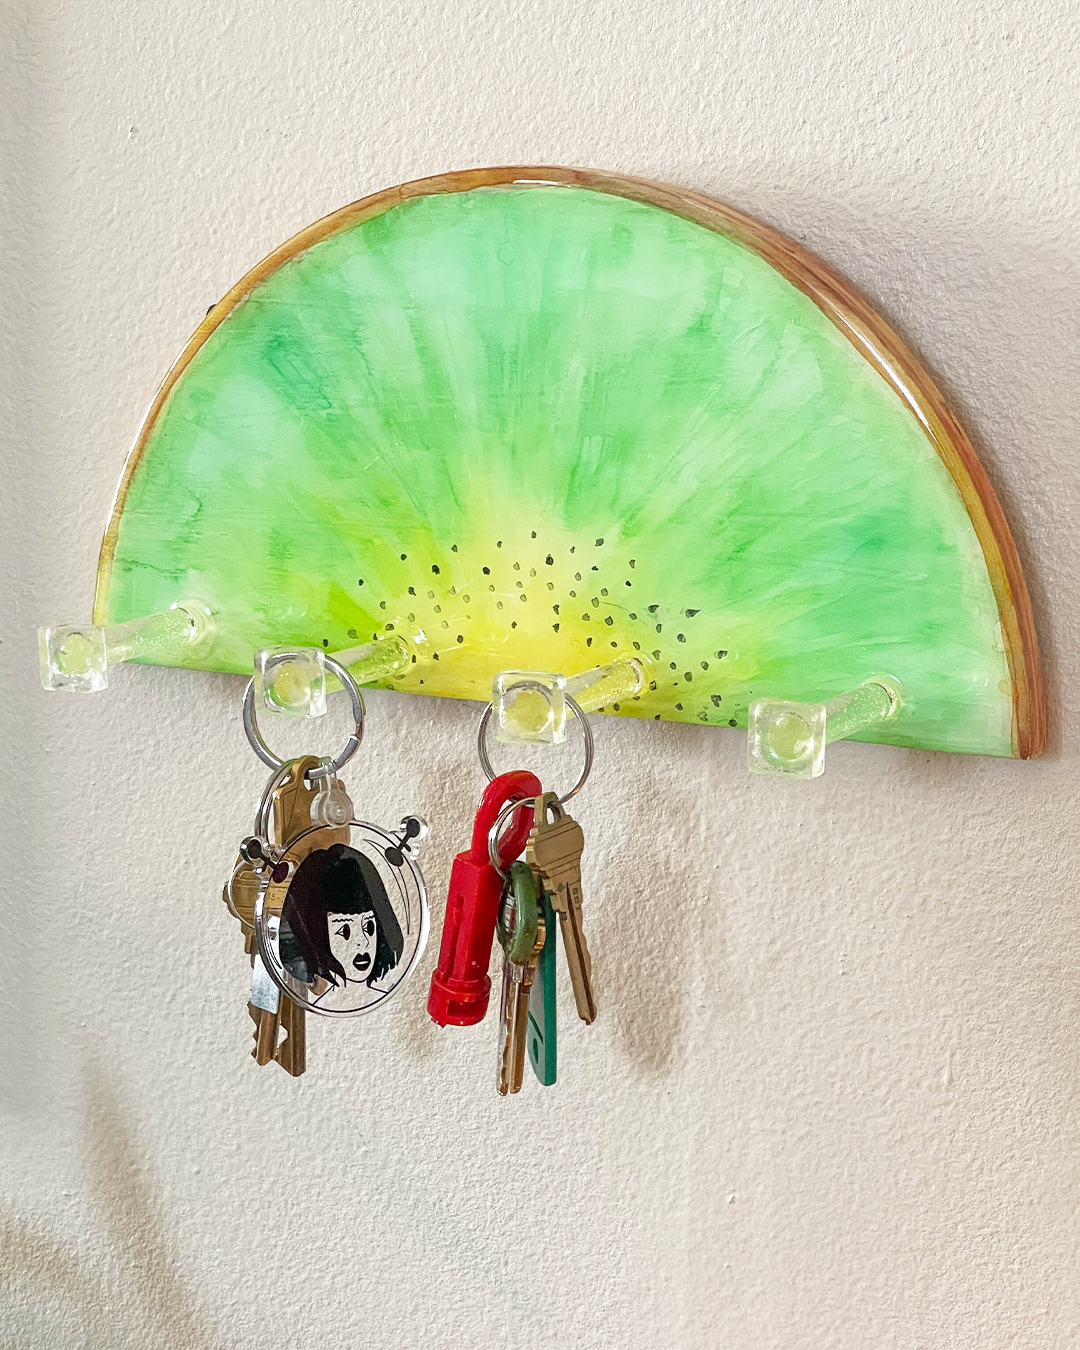 Lightweight and easy-to-install kiwi design key holder, equipped with D-rings for hassle-free hanging.